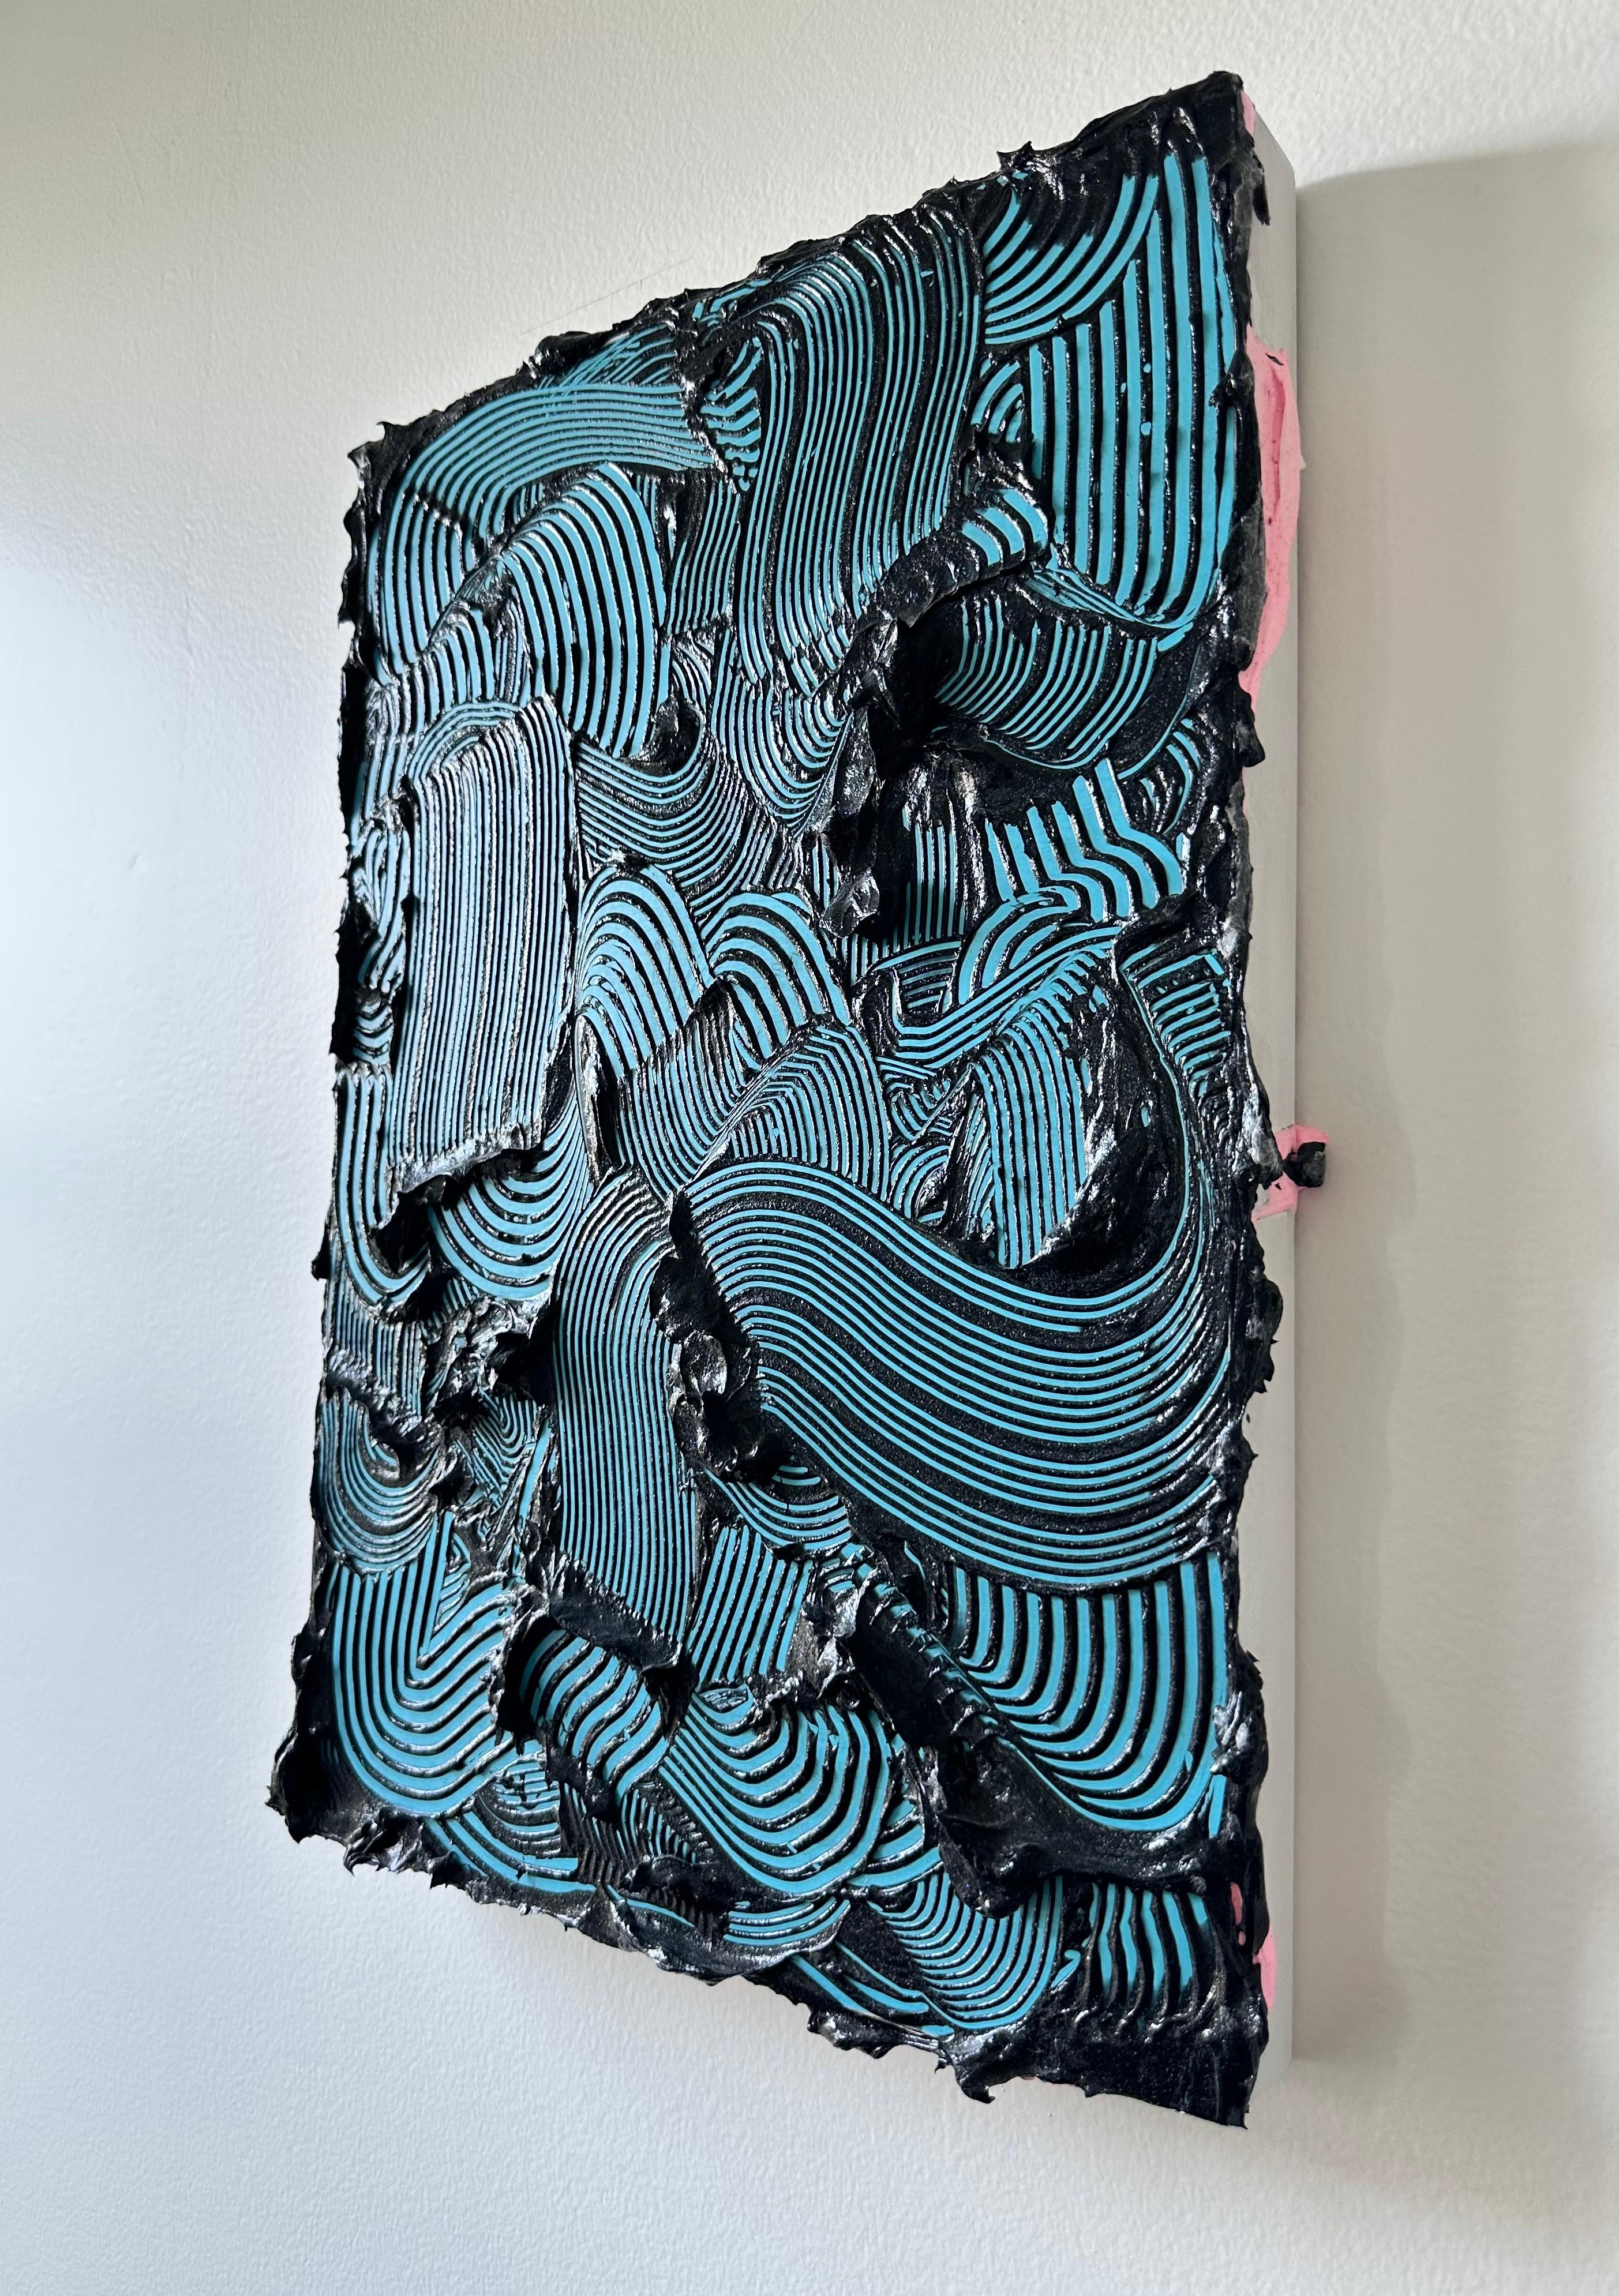 Poseidon - textured contemporary painting, colorful, blue strokes, abstract - Abstract Sculpture by Tim Nikiforuk